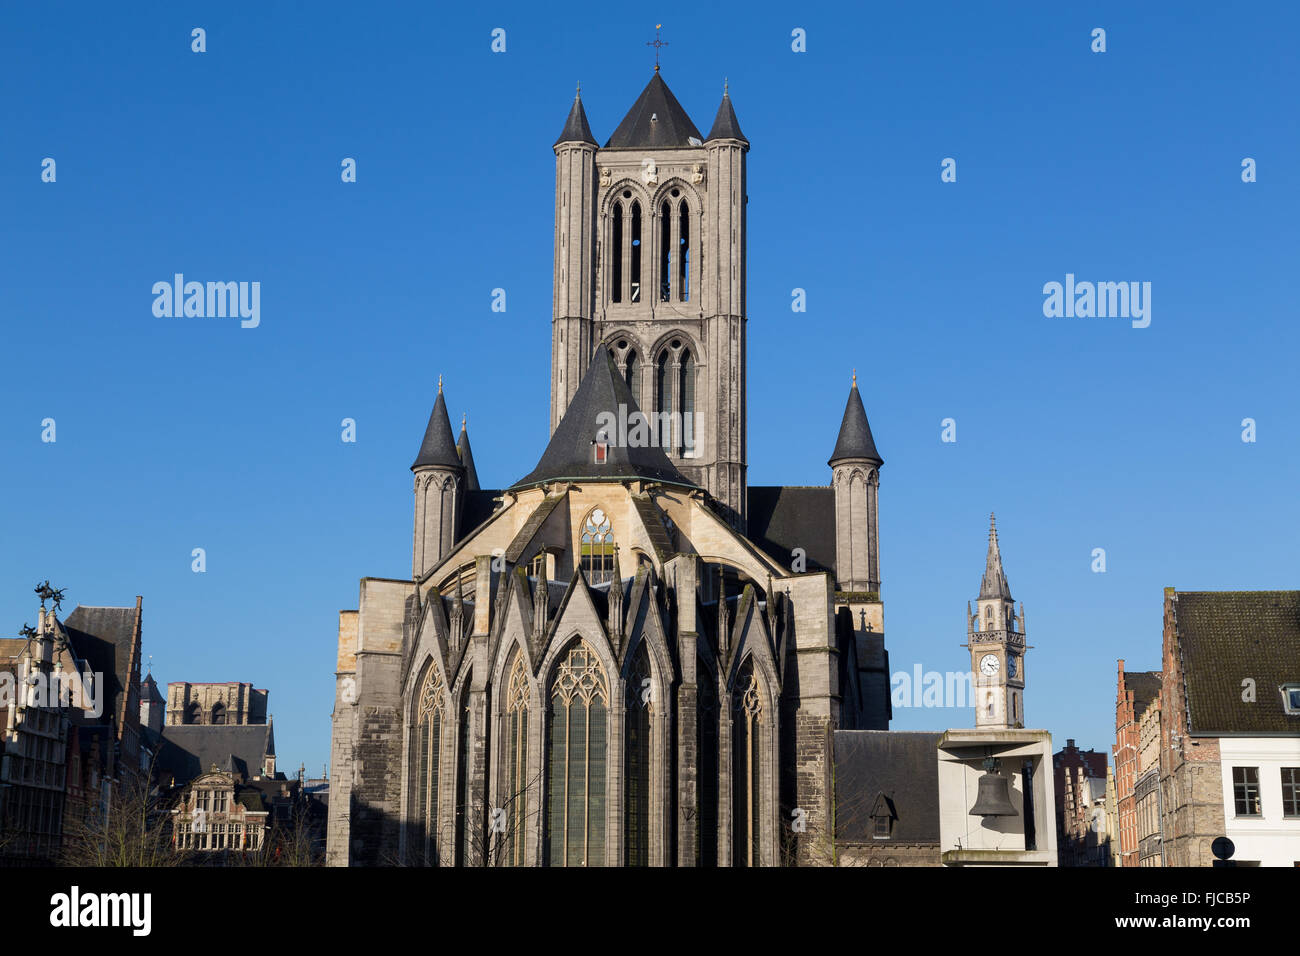 Saint Nicholas' Church in Ghent City Center on a bright clear day. There is space for text. Stock Photo